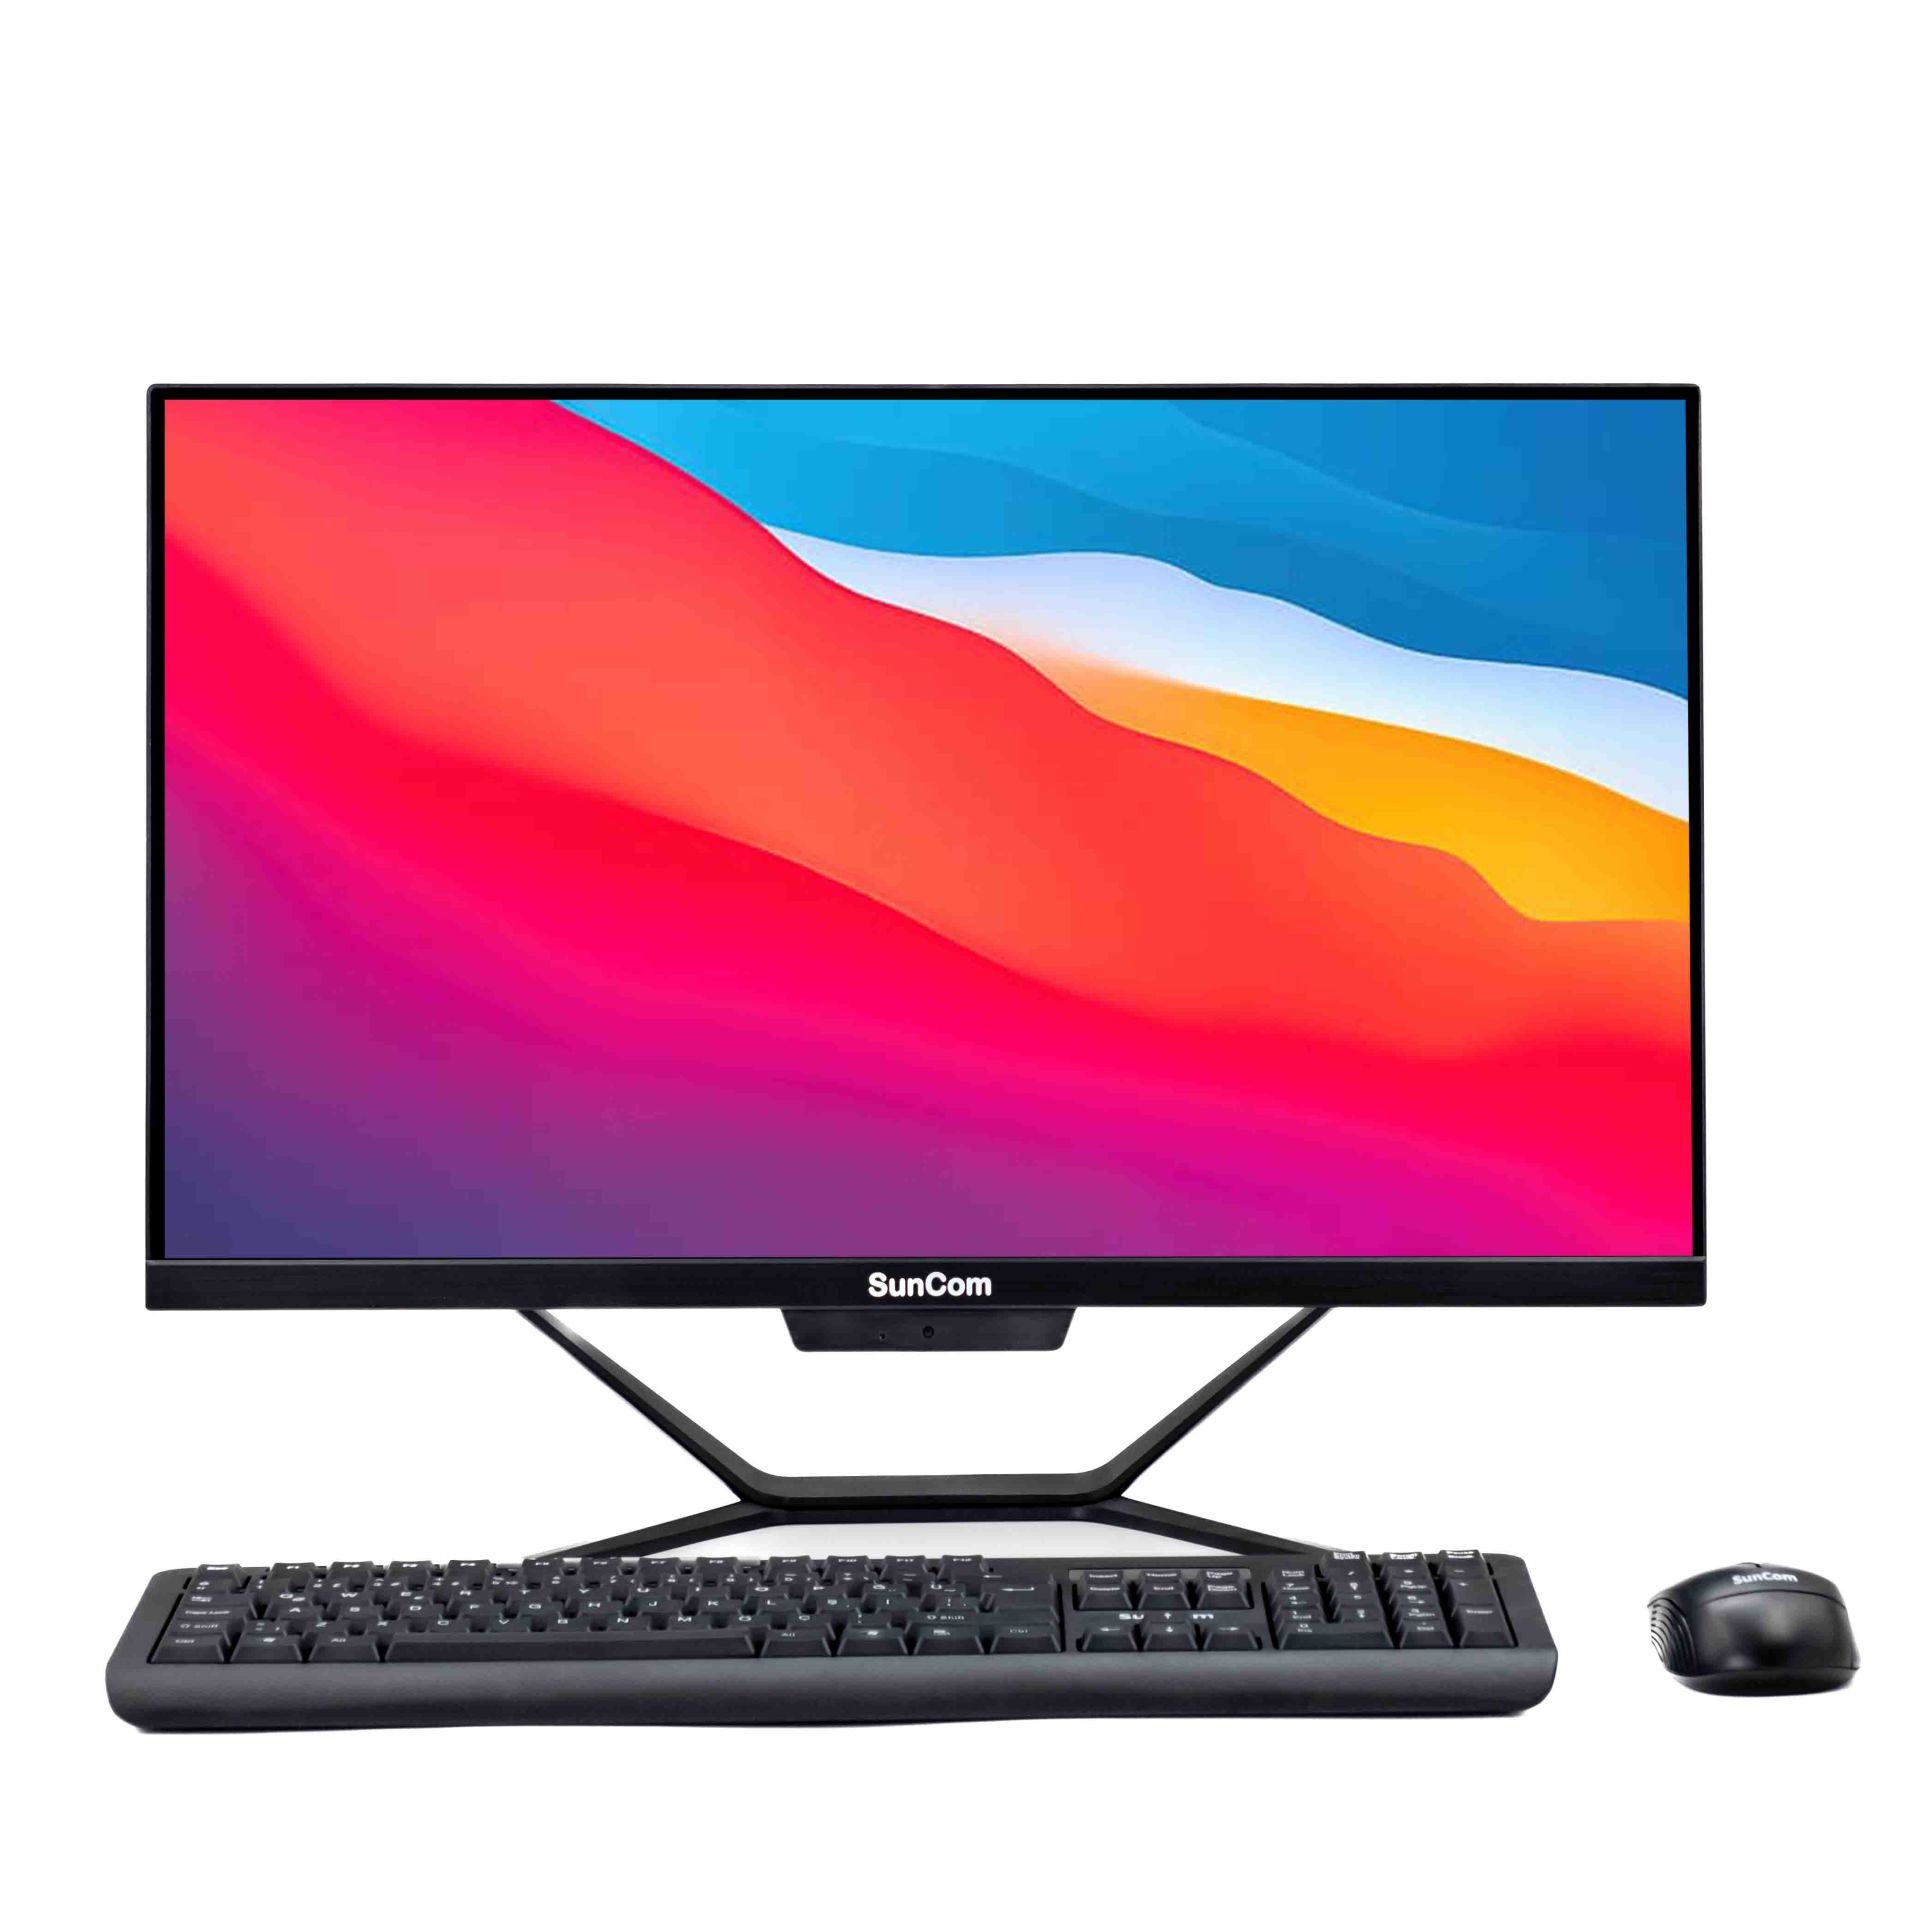 SUNCOM TALİSMAN SCA-52482M21 I5-2400S 8GB 256SSD 21.5'' IPS NONTOUCH FREE-DOS SIYAH ALL IN ONE PC